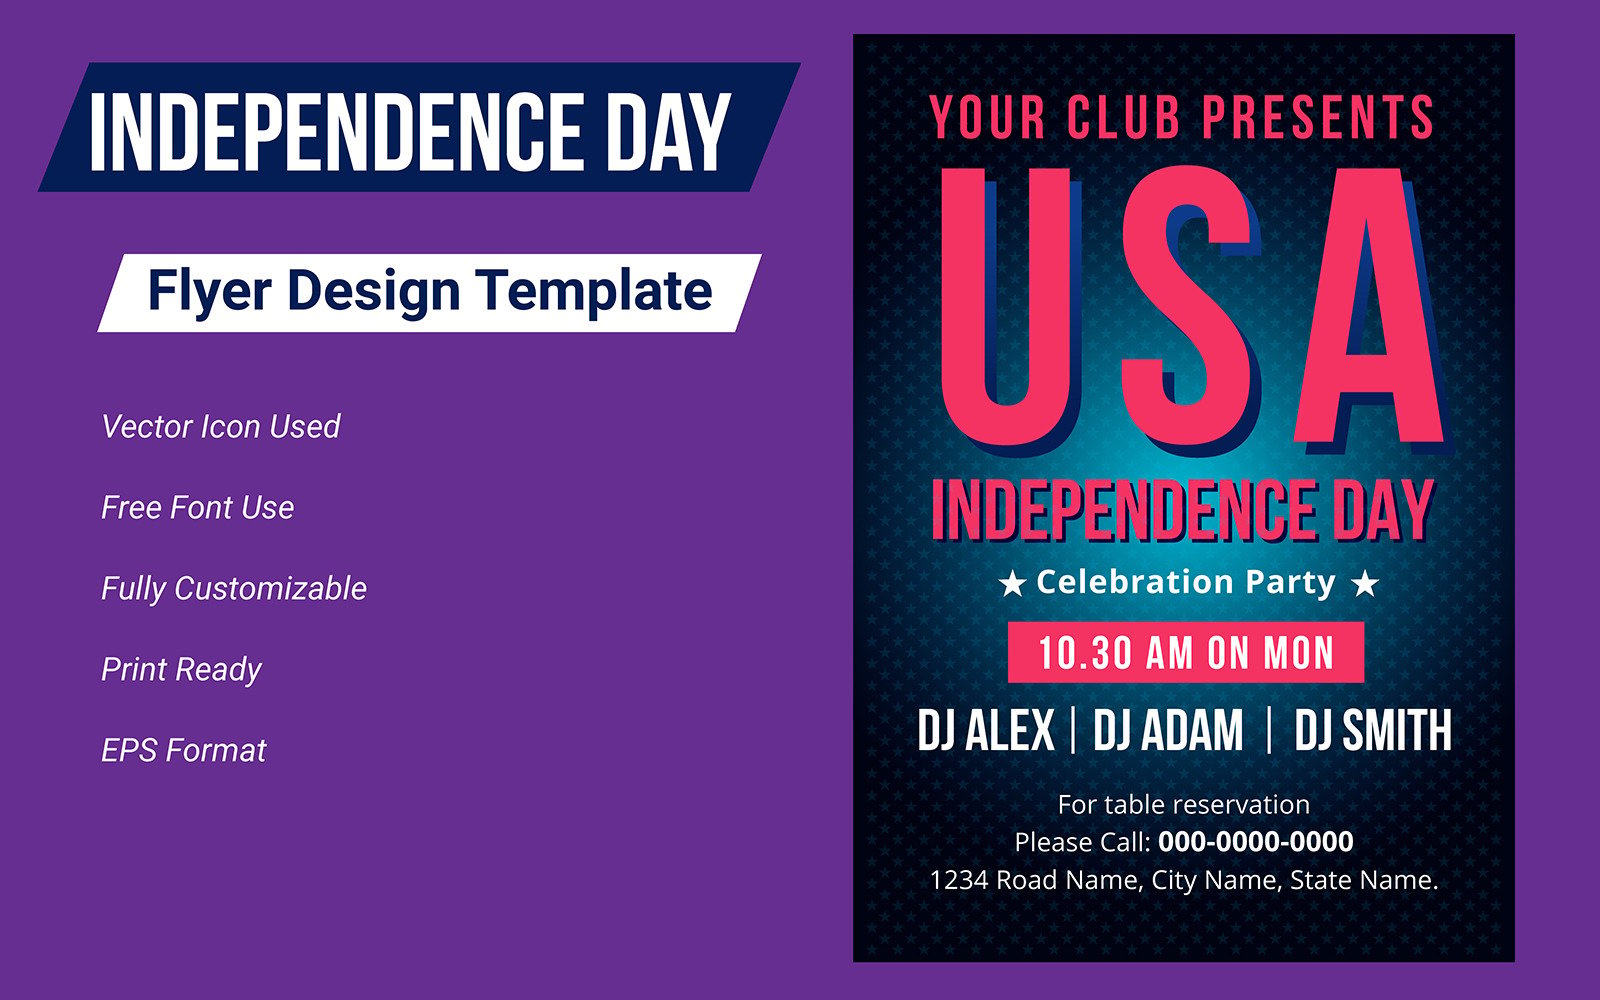 USA Independence Day Poster Design Template - TemplateMonster